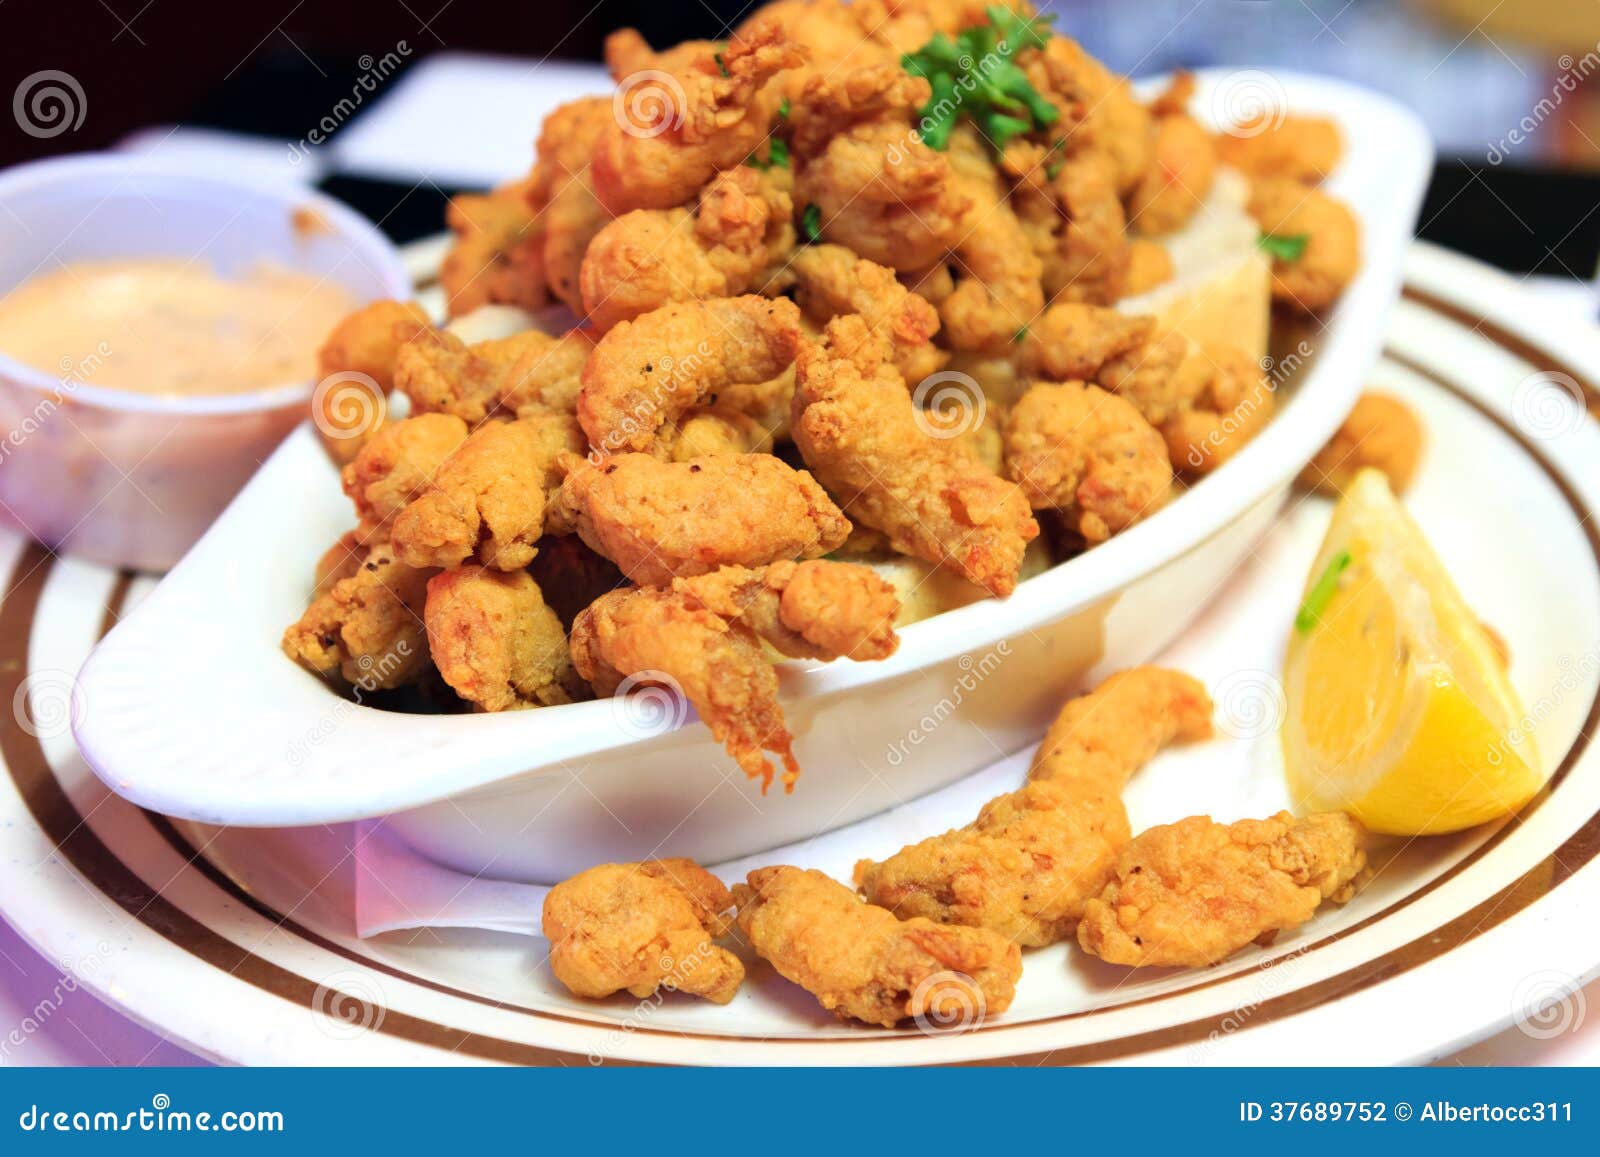 new orleans fried crawfish